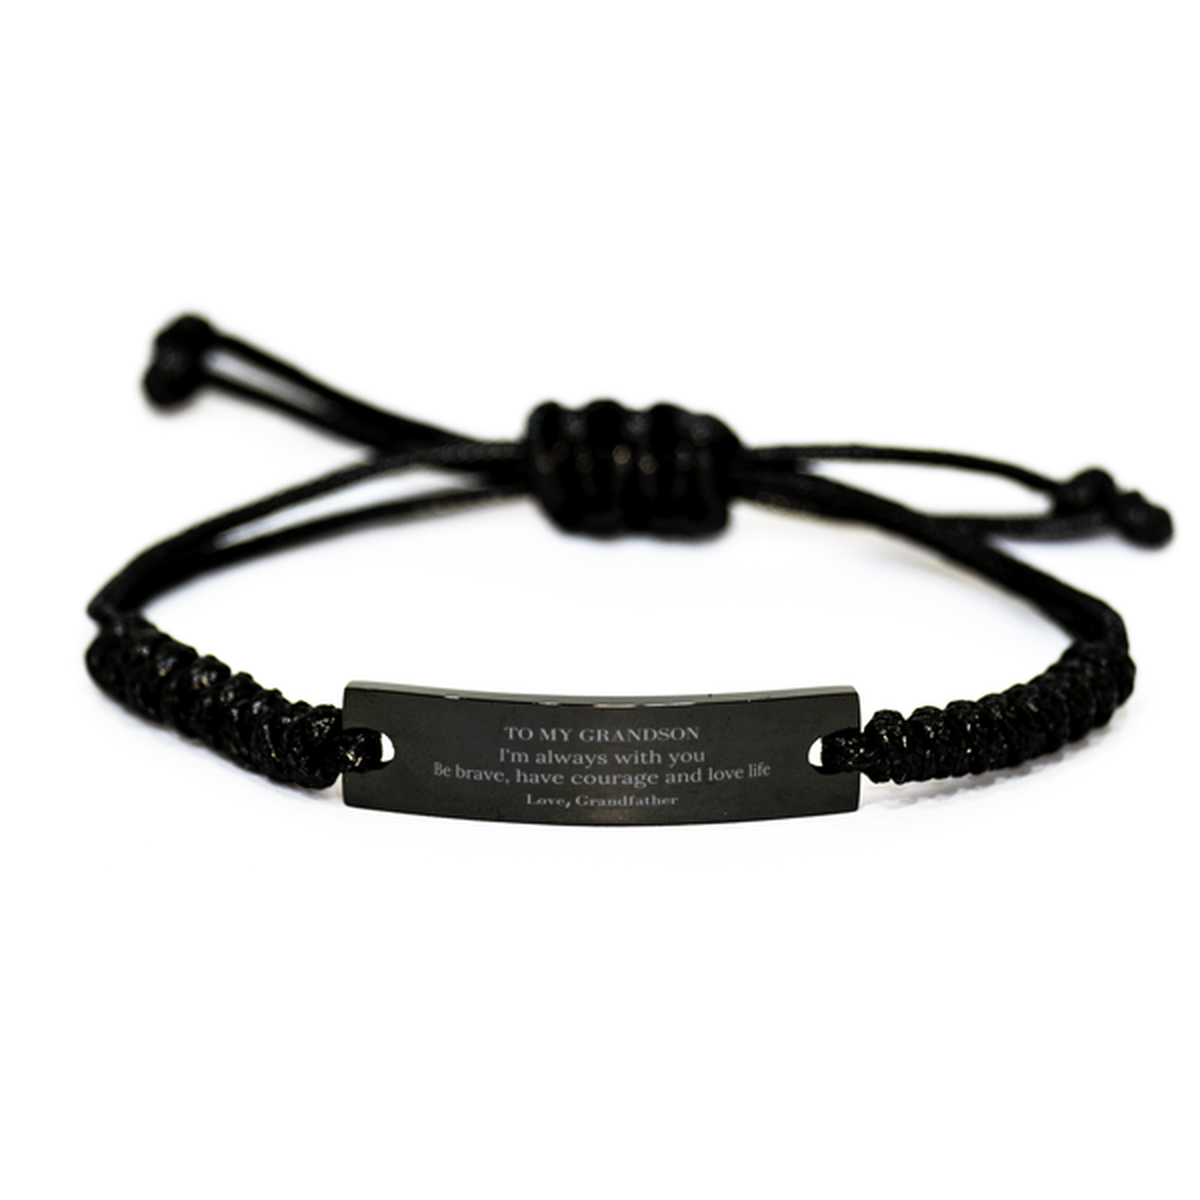 To My Grandson Gifts from Grandfather, Unique Black Rope Bracelet Inspirational Christmas Birthday Graduation Gifts for Grandson I'm always with you. Be brave, have courage and love life. Love, Grandfather